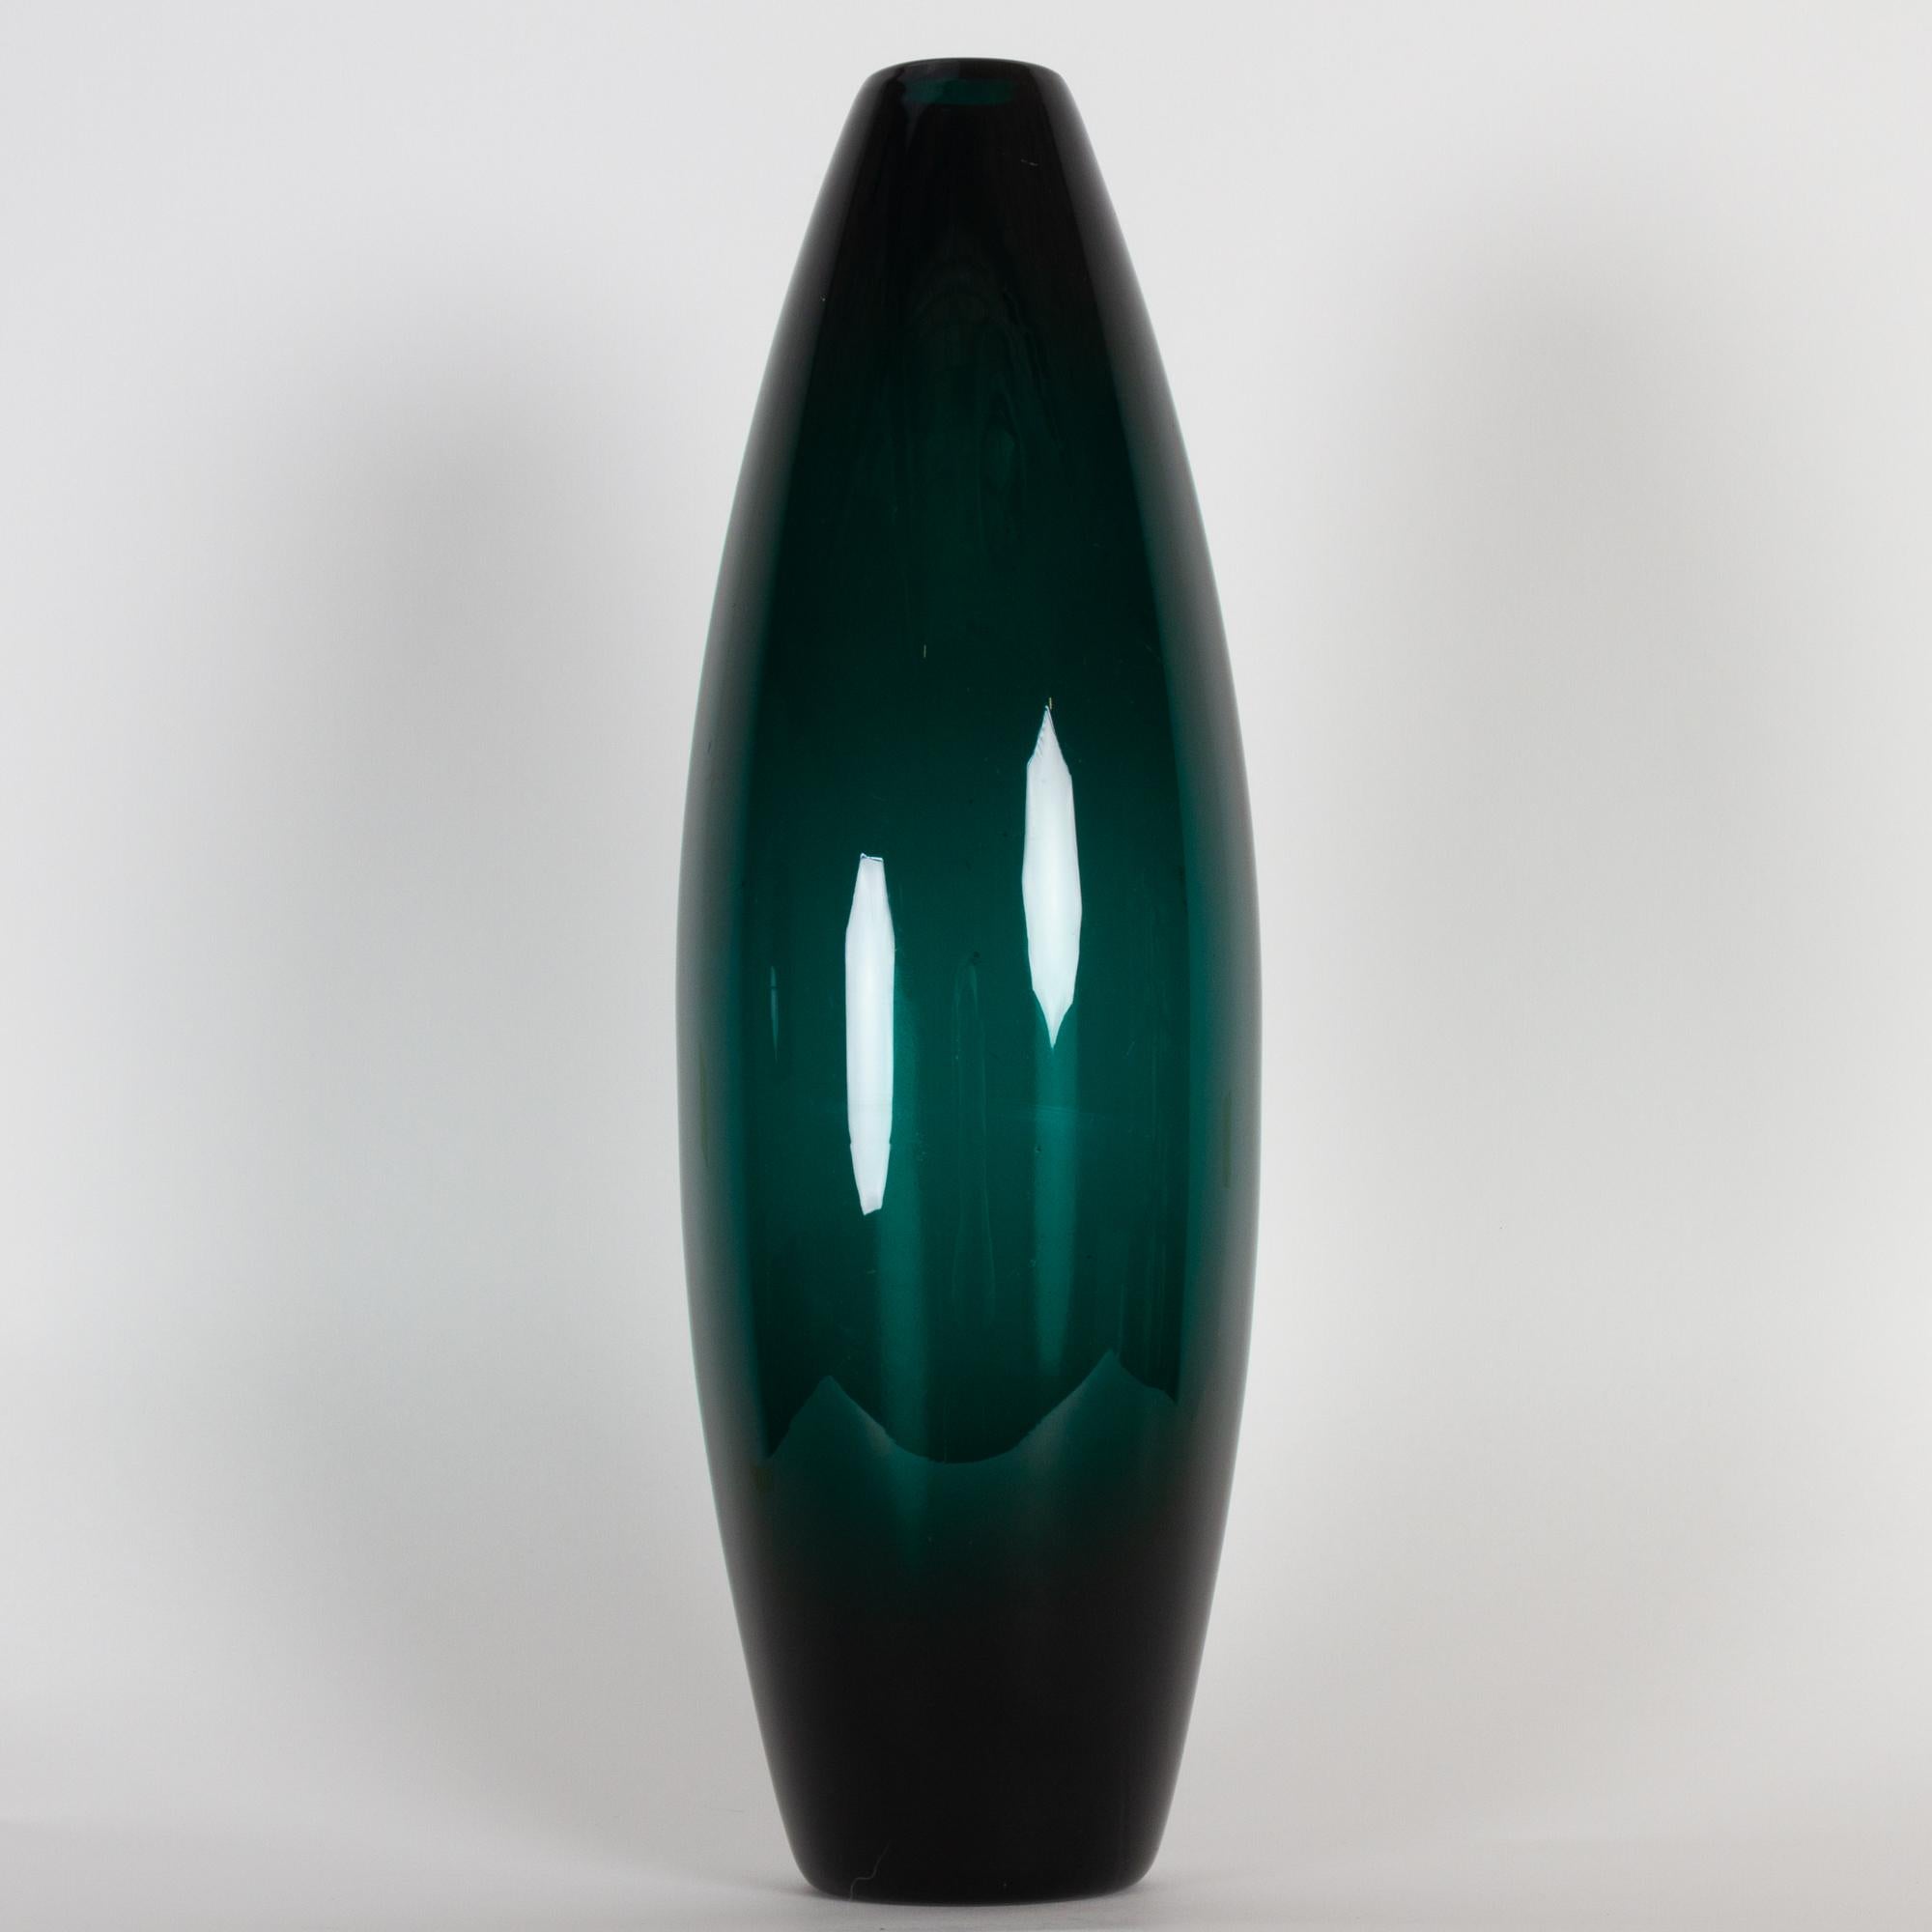 Tall Greenland torpedo vase by Per Lütken for Holmegaard, 1960s.
This tall torpedo shaped mouth blown vase from Holmegaard glassworks Greenland-series is designed by artist Per Lütken in 1960. All the items in the Greenland series has this